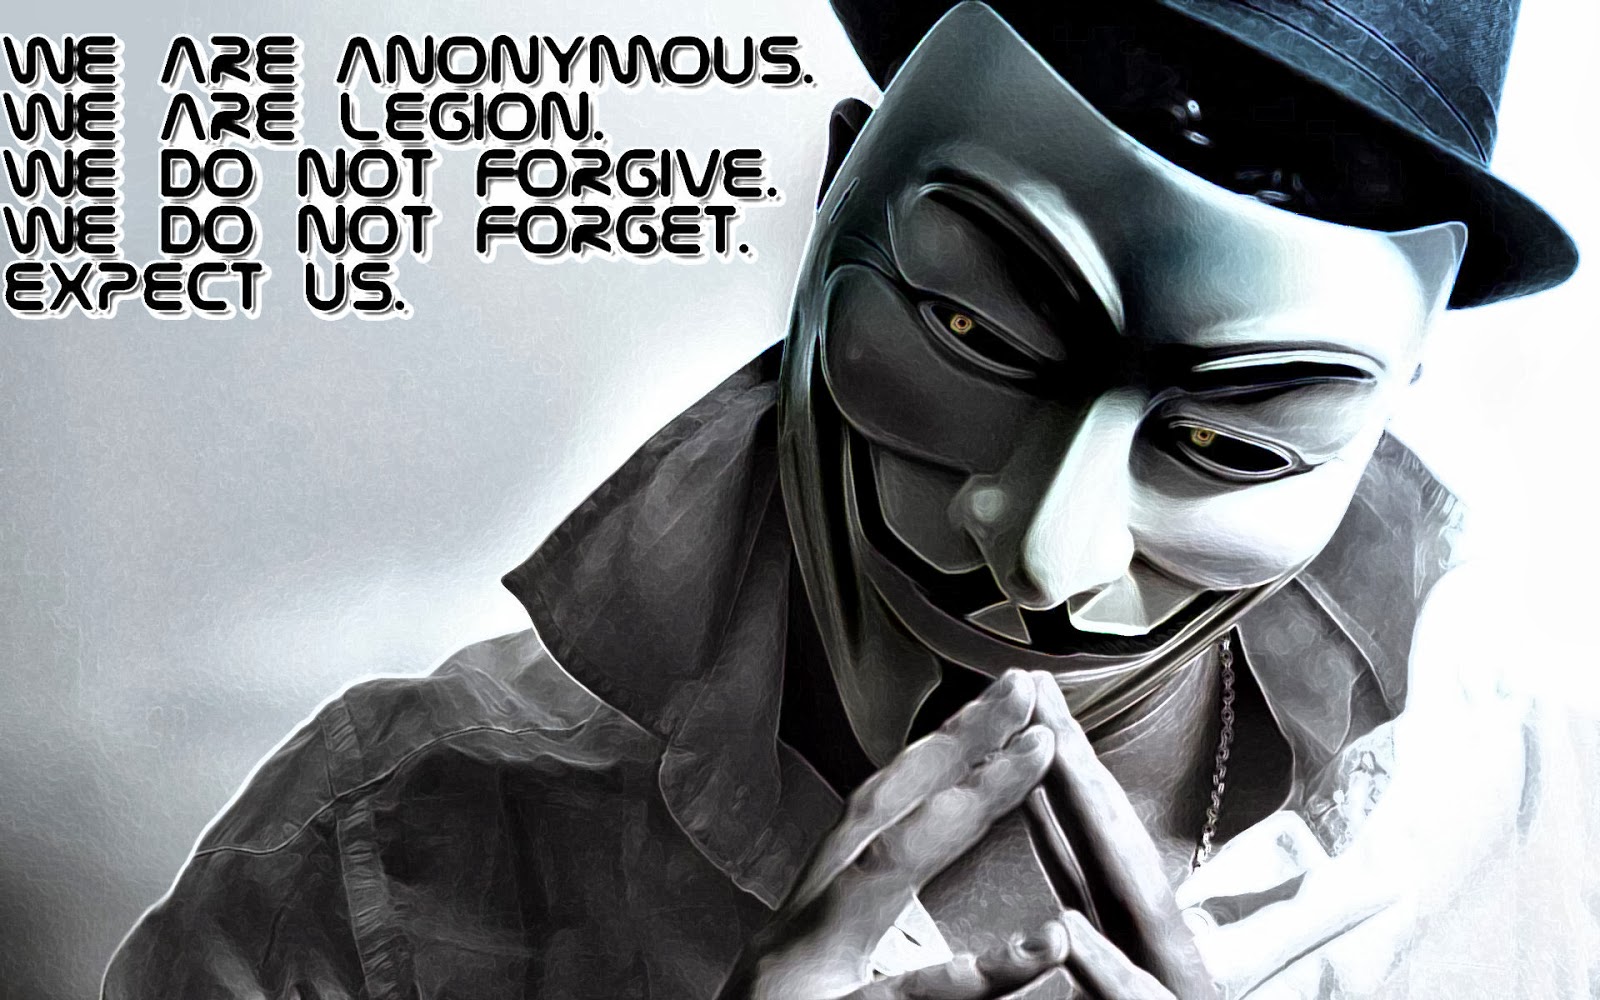 HACKERZ BY MUHIB DON: Anonymous Hackers